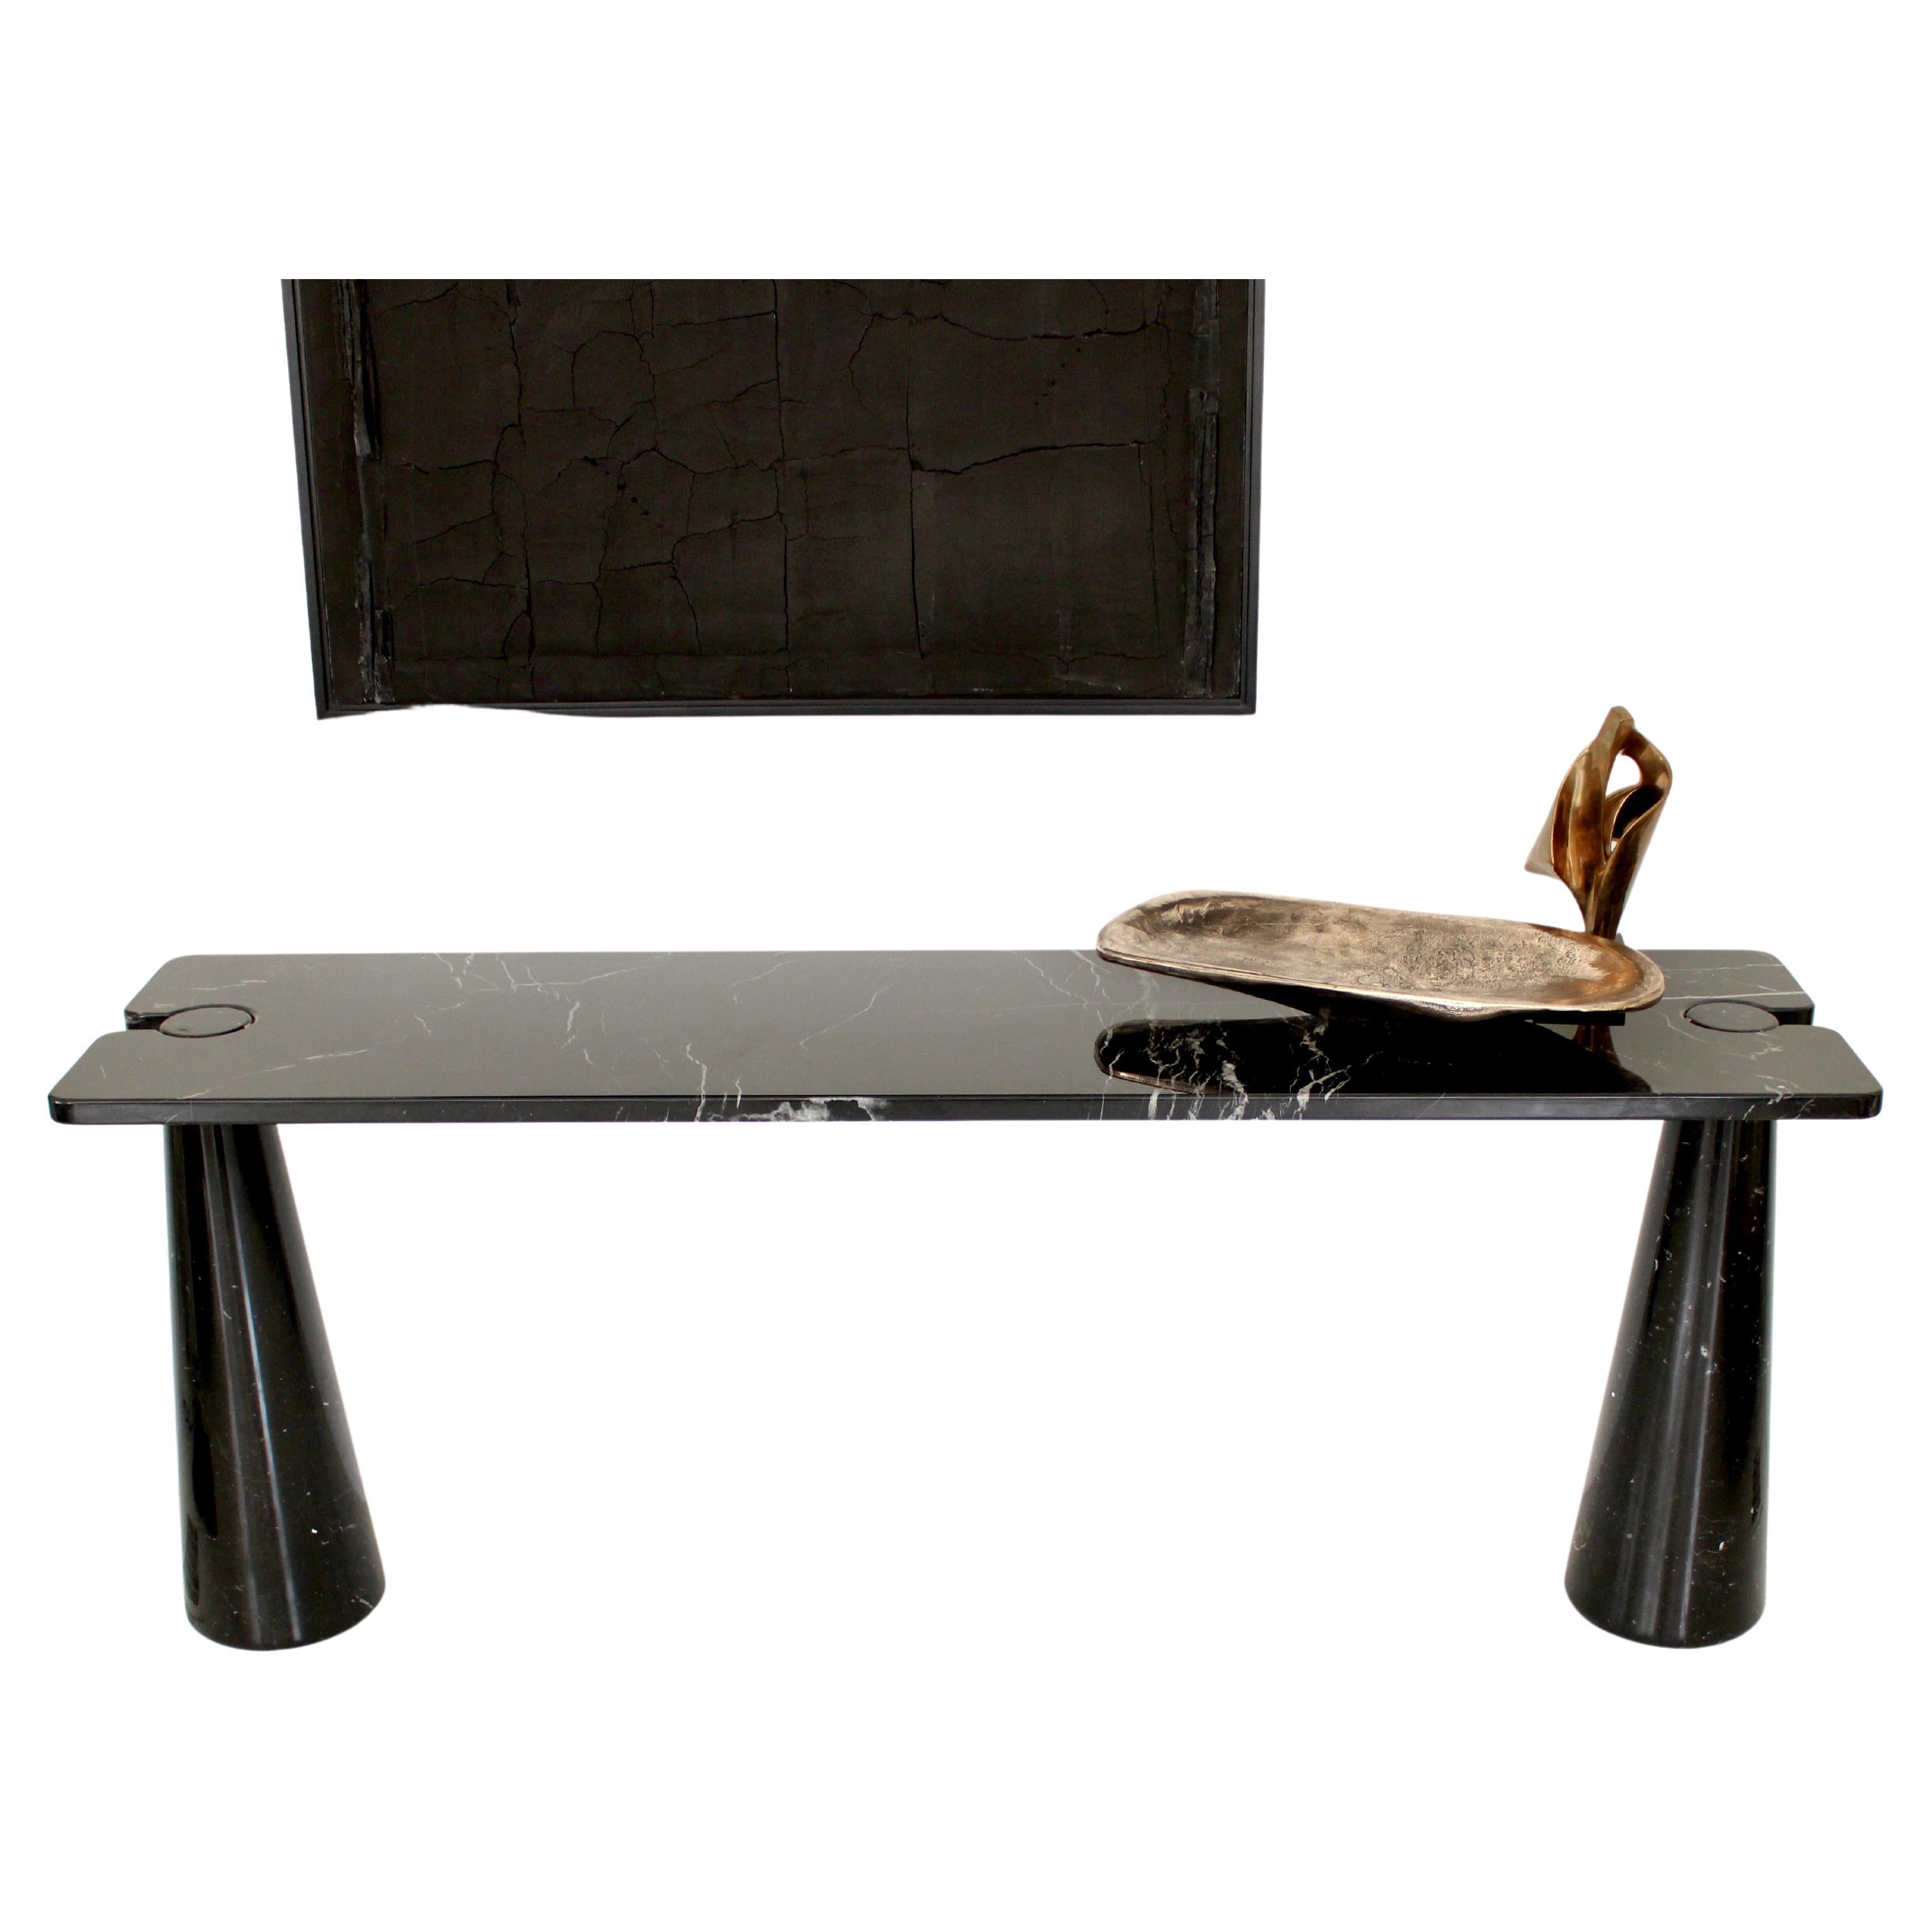 Angelo Mangiarotti vintage iconic Italian console Eros collection for Skipper model E 20.
The black or Nero Marquina marble is veined nicely.
The top sits on the conical legs in the iconic Mangiarotti finely designed architectural manner. No